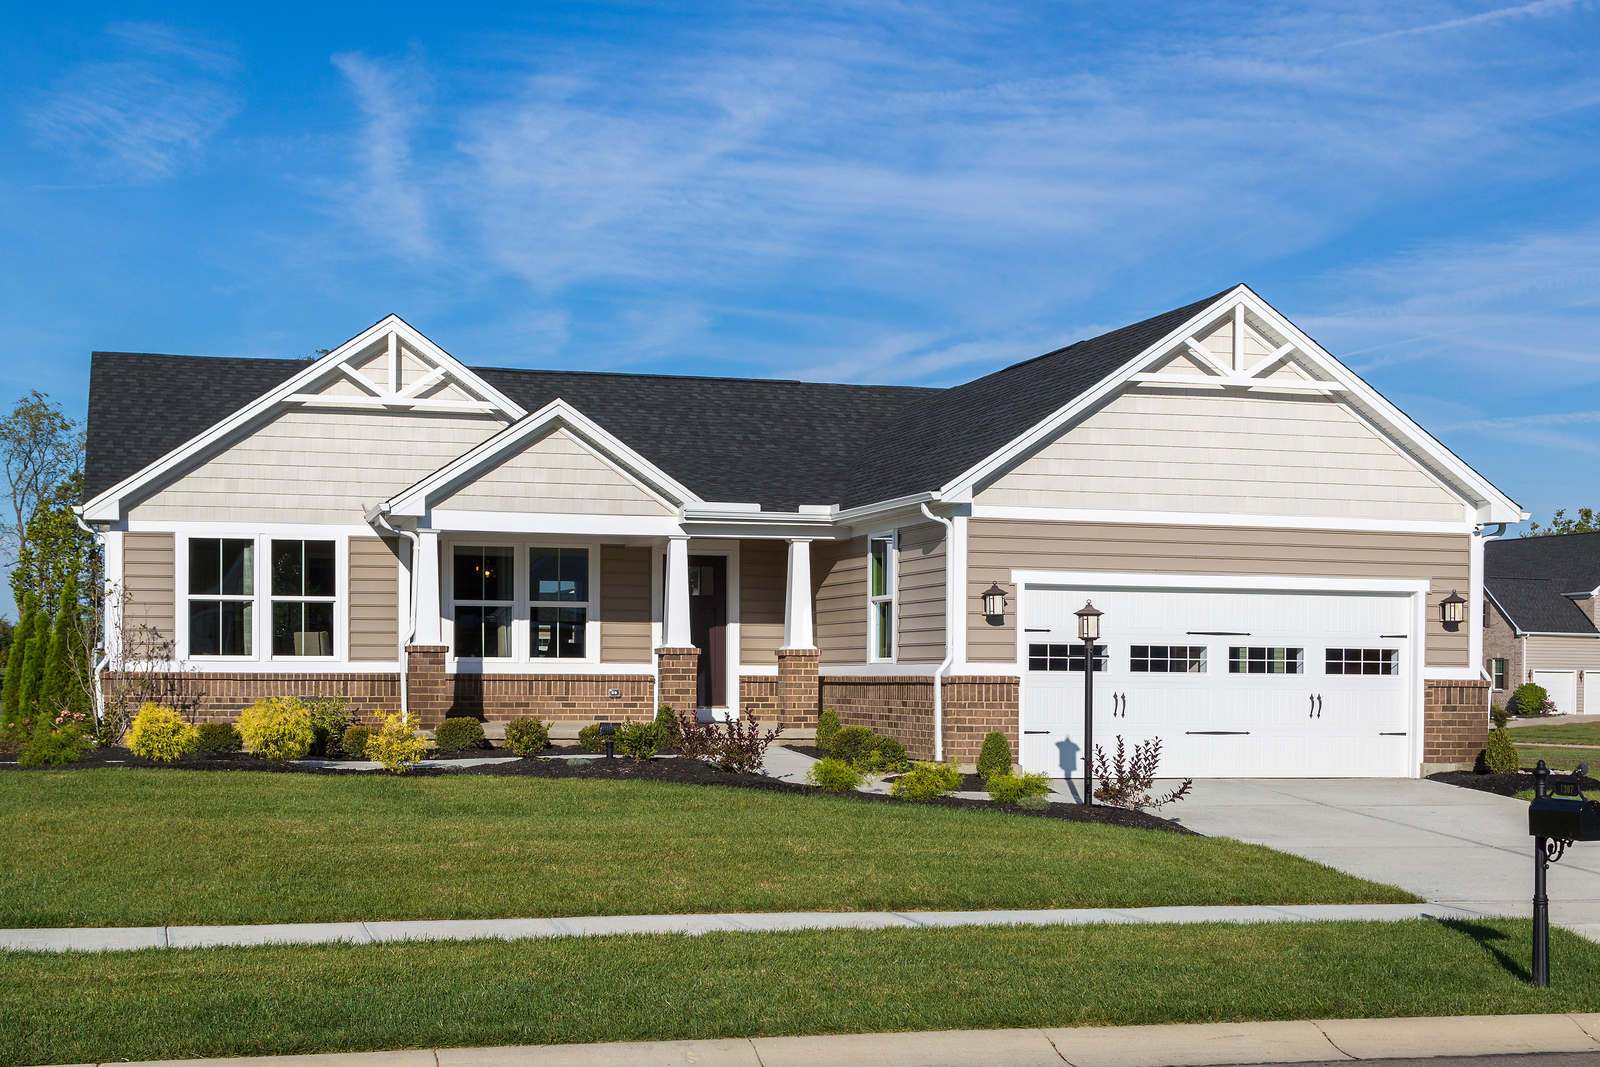 New Homes for sale at Wilson Farms in Franklin, OH within